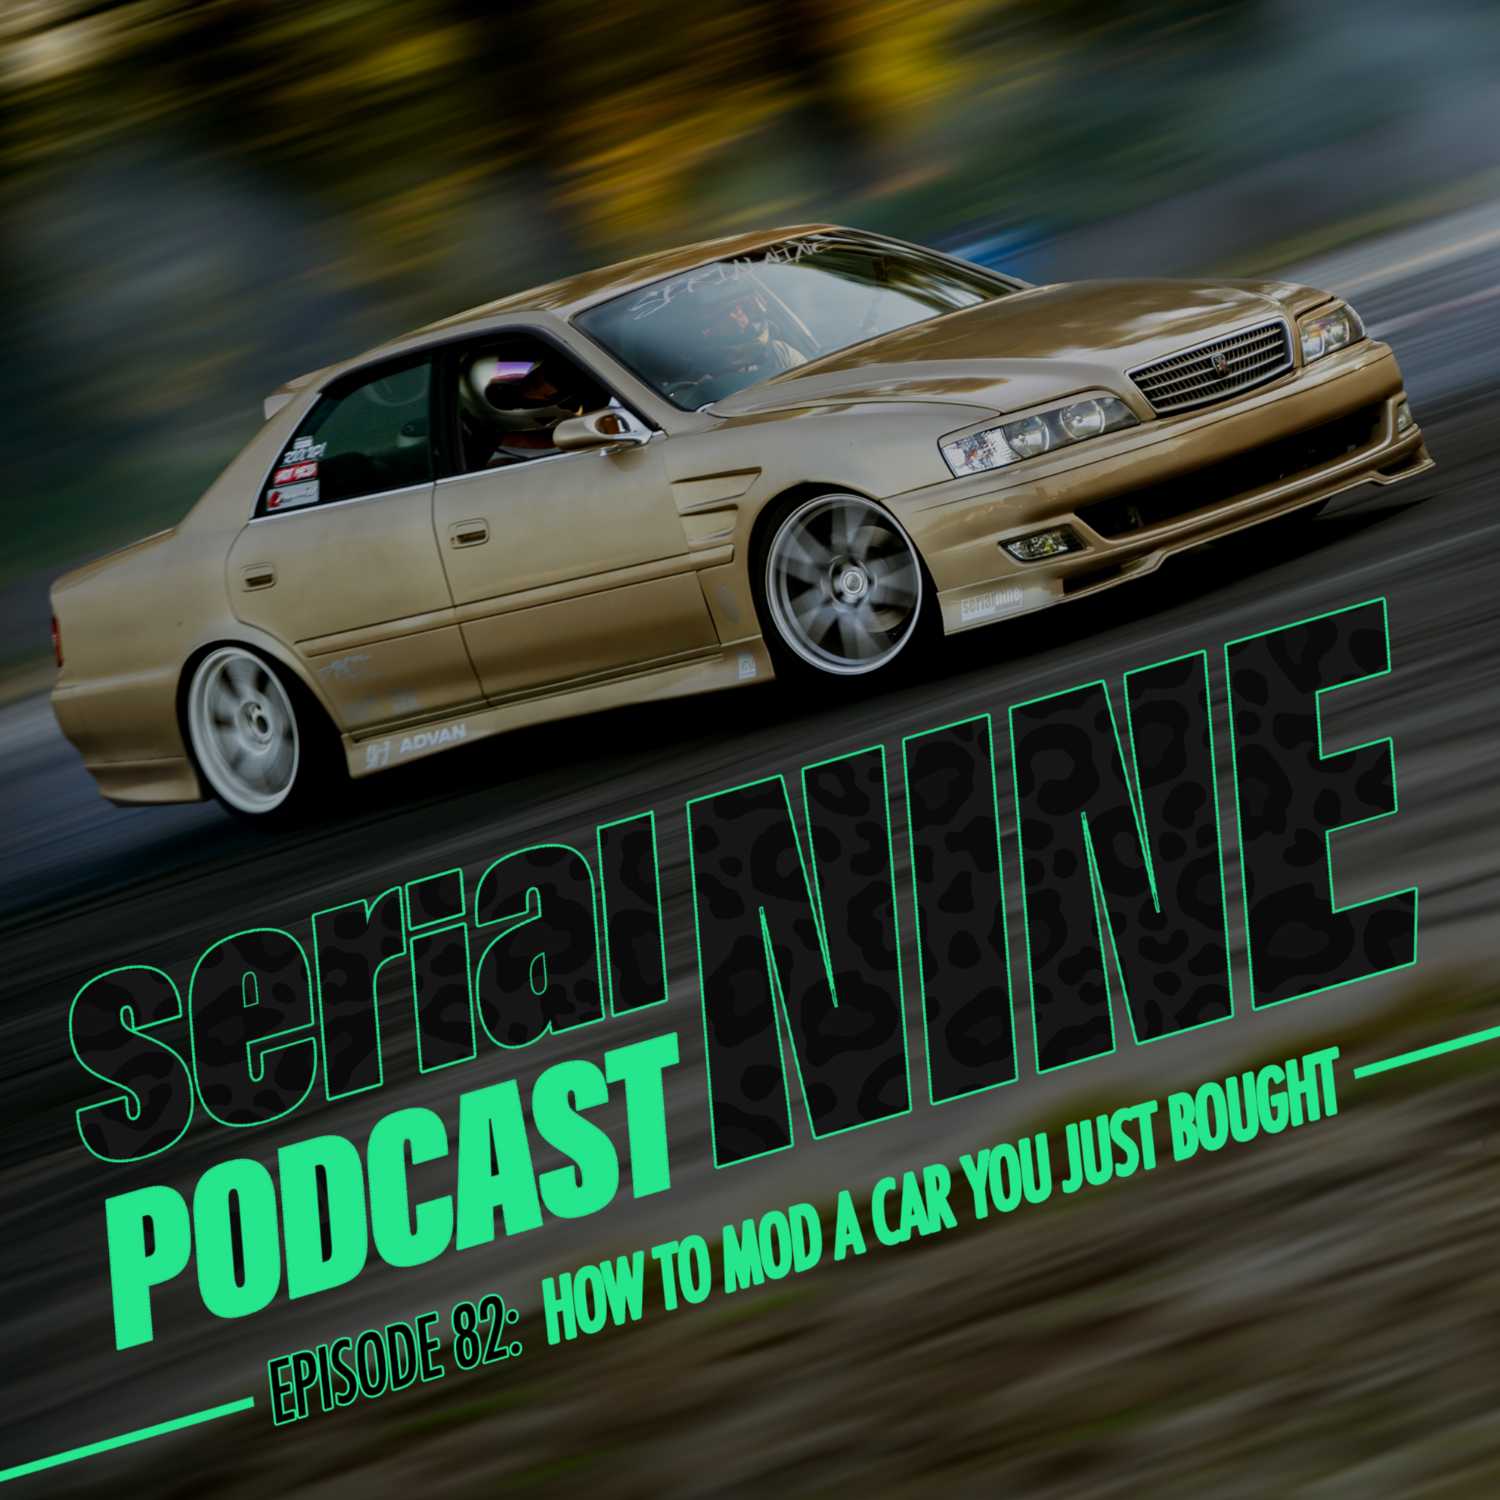 SerialPodcastNine Episode 82 - How to mod a car you just bought!